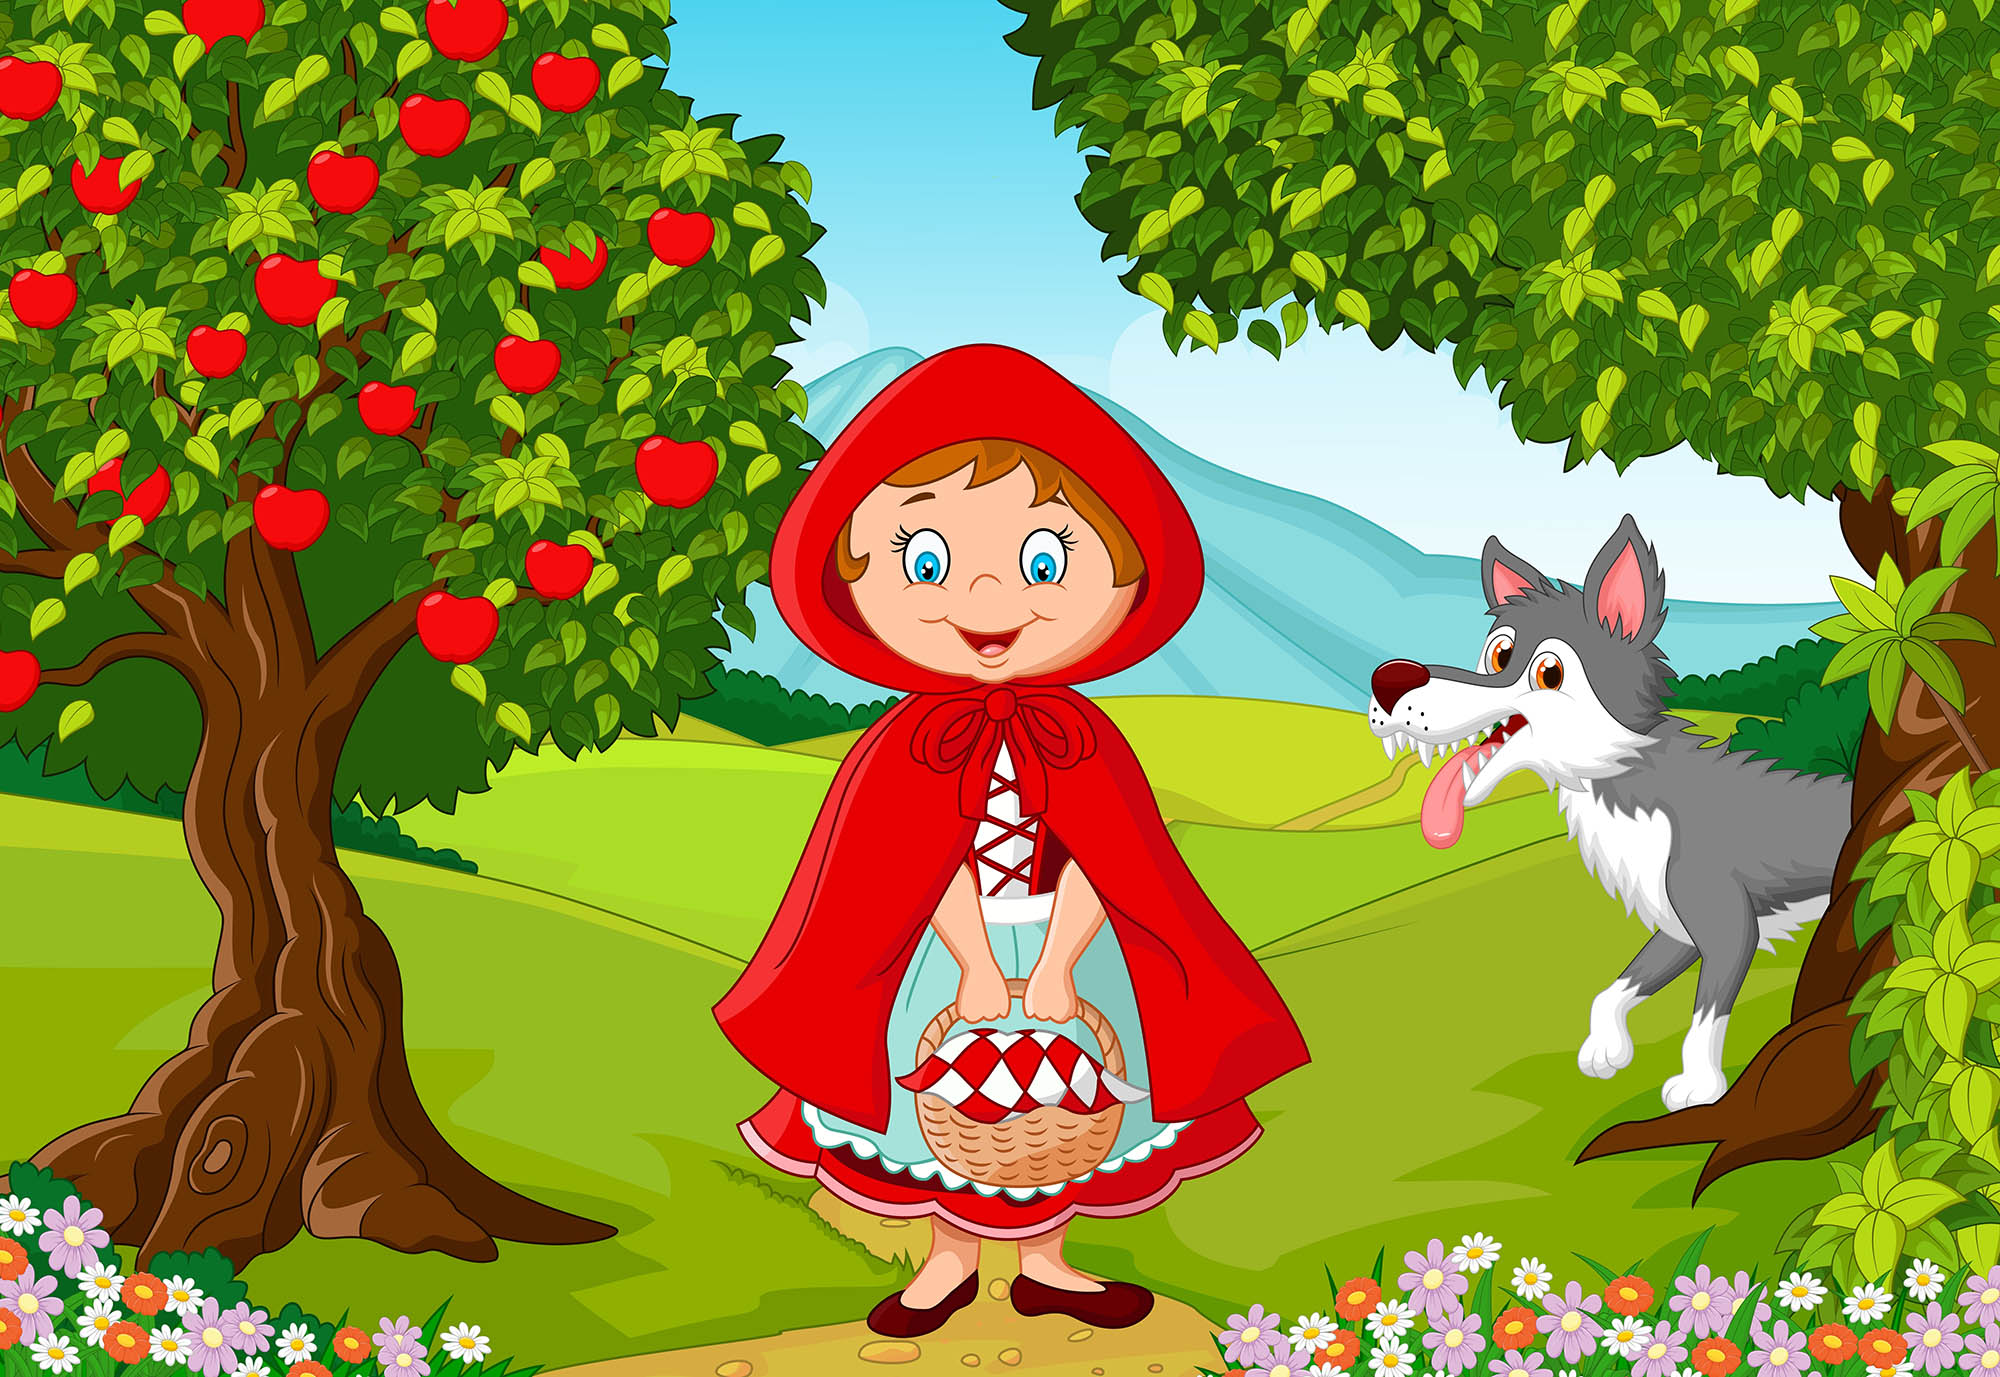 the-story-of-the-little-red-riding-hood